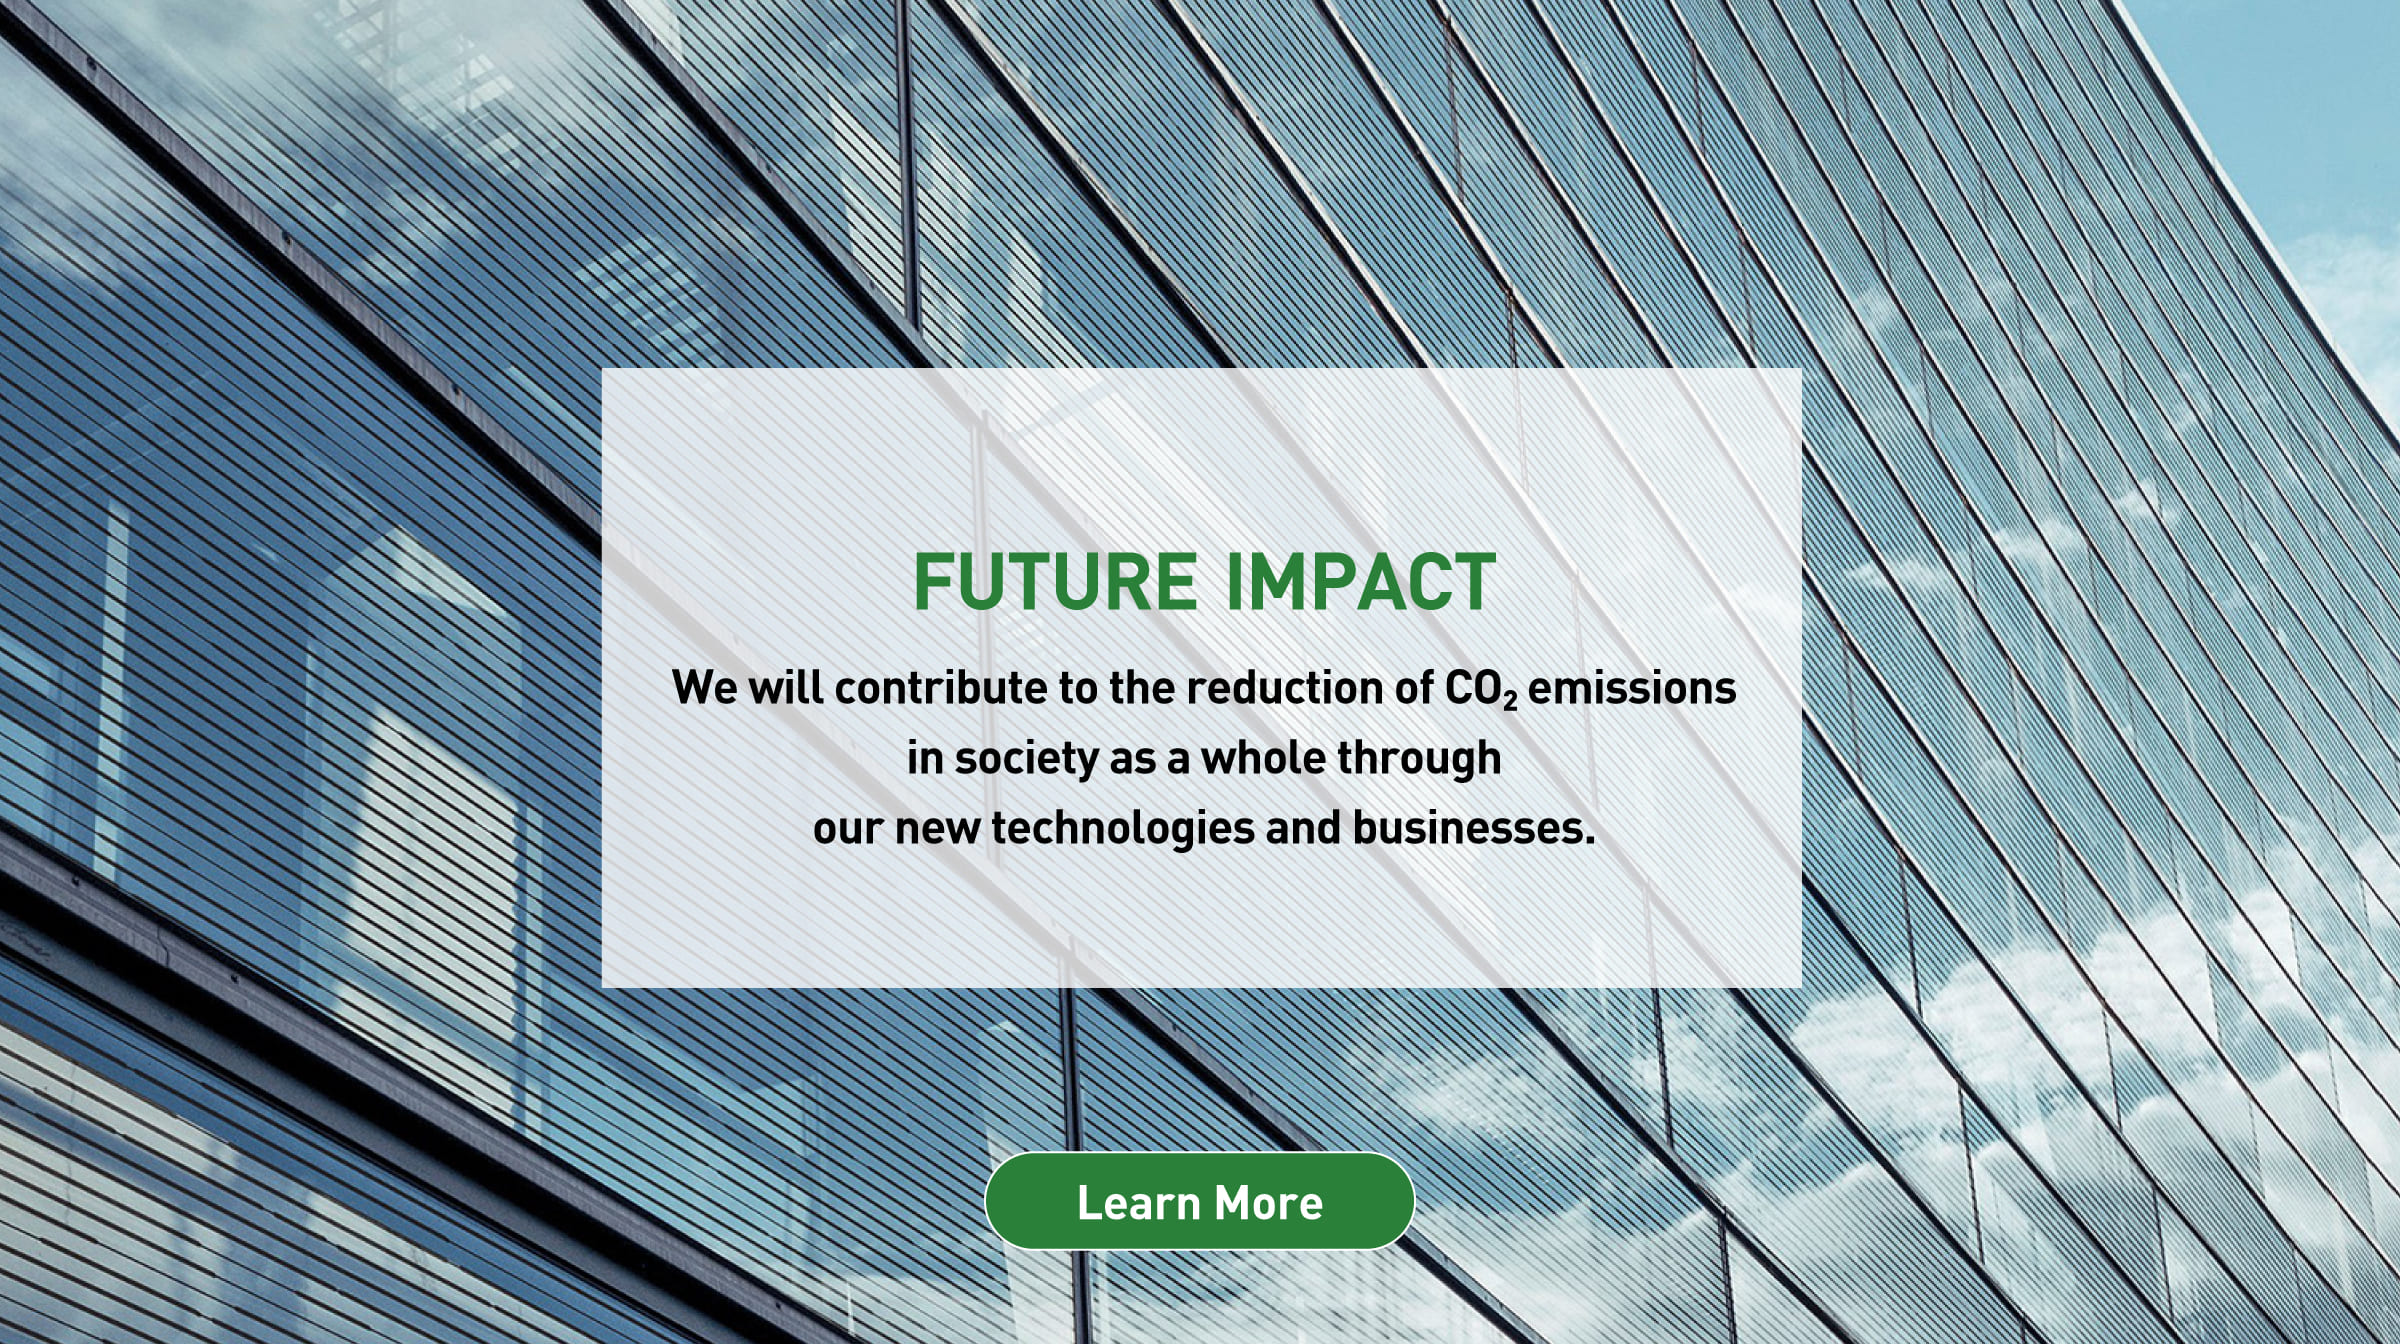 FUTURE IMPACT We will contribute to the reduction of CO2 emissions in society as a whole through our new technologies and businesses.  Learn More 